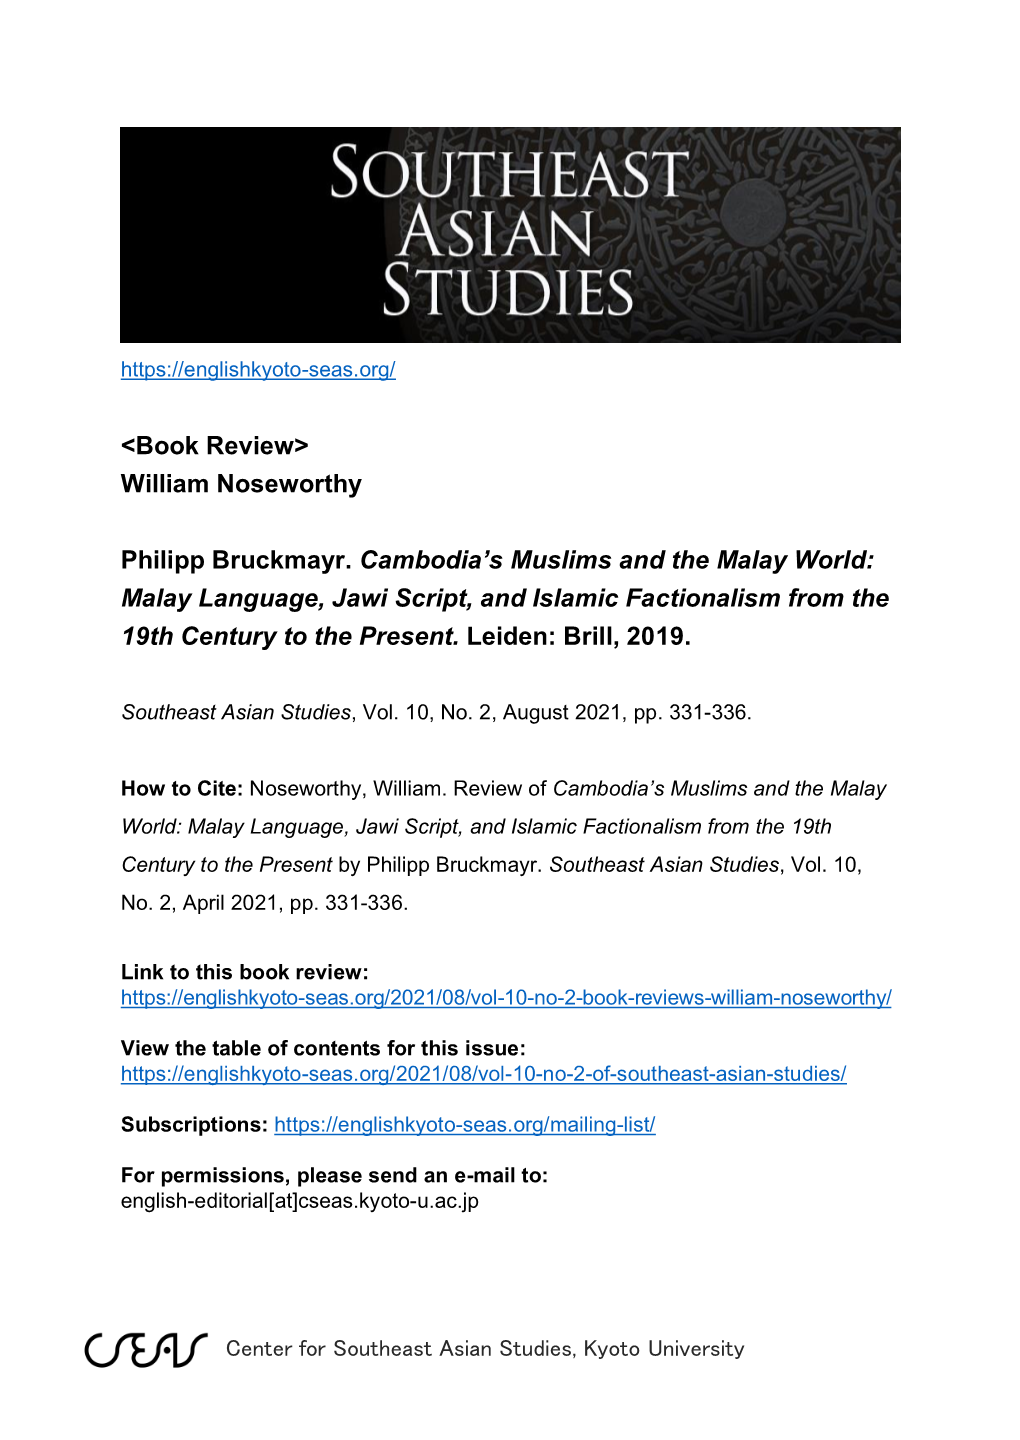 &lt;Book Review&gt; William Noseworthy Philipp Bruckmayr. Cambodia's Muslims and the Malay World